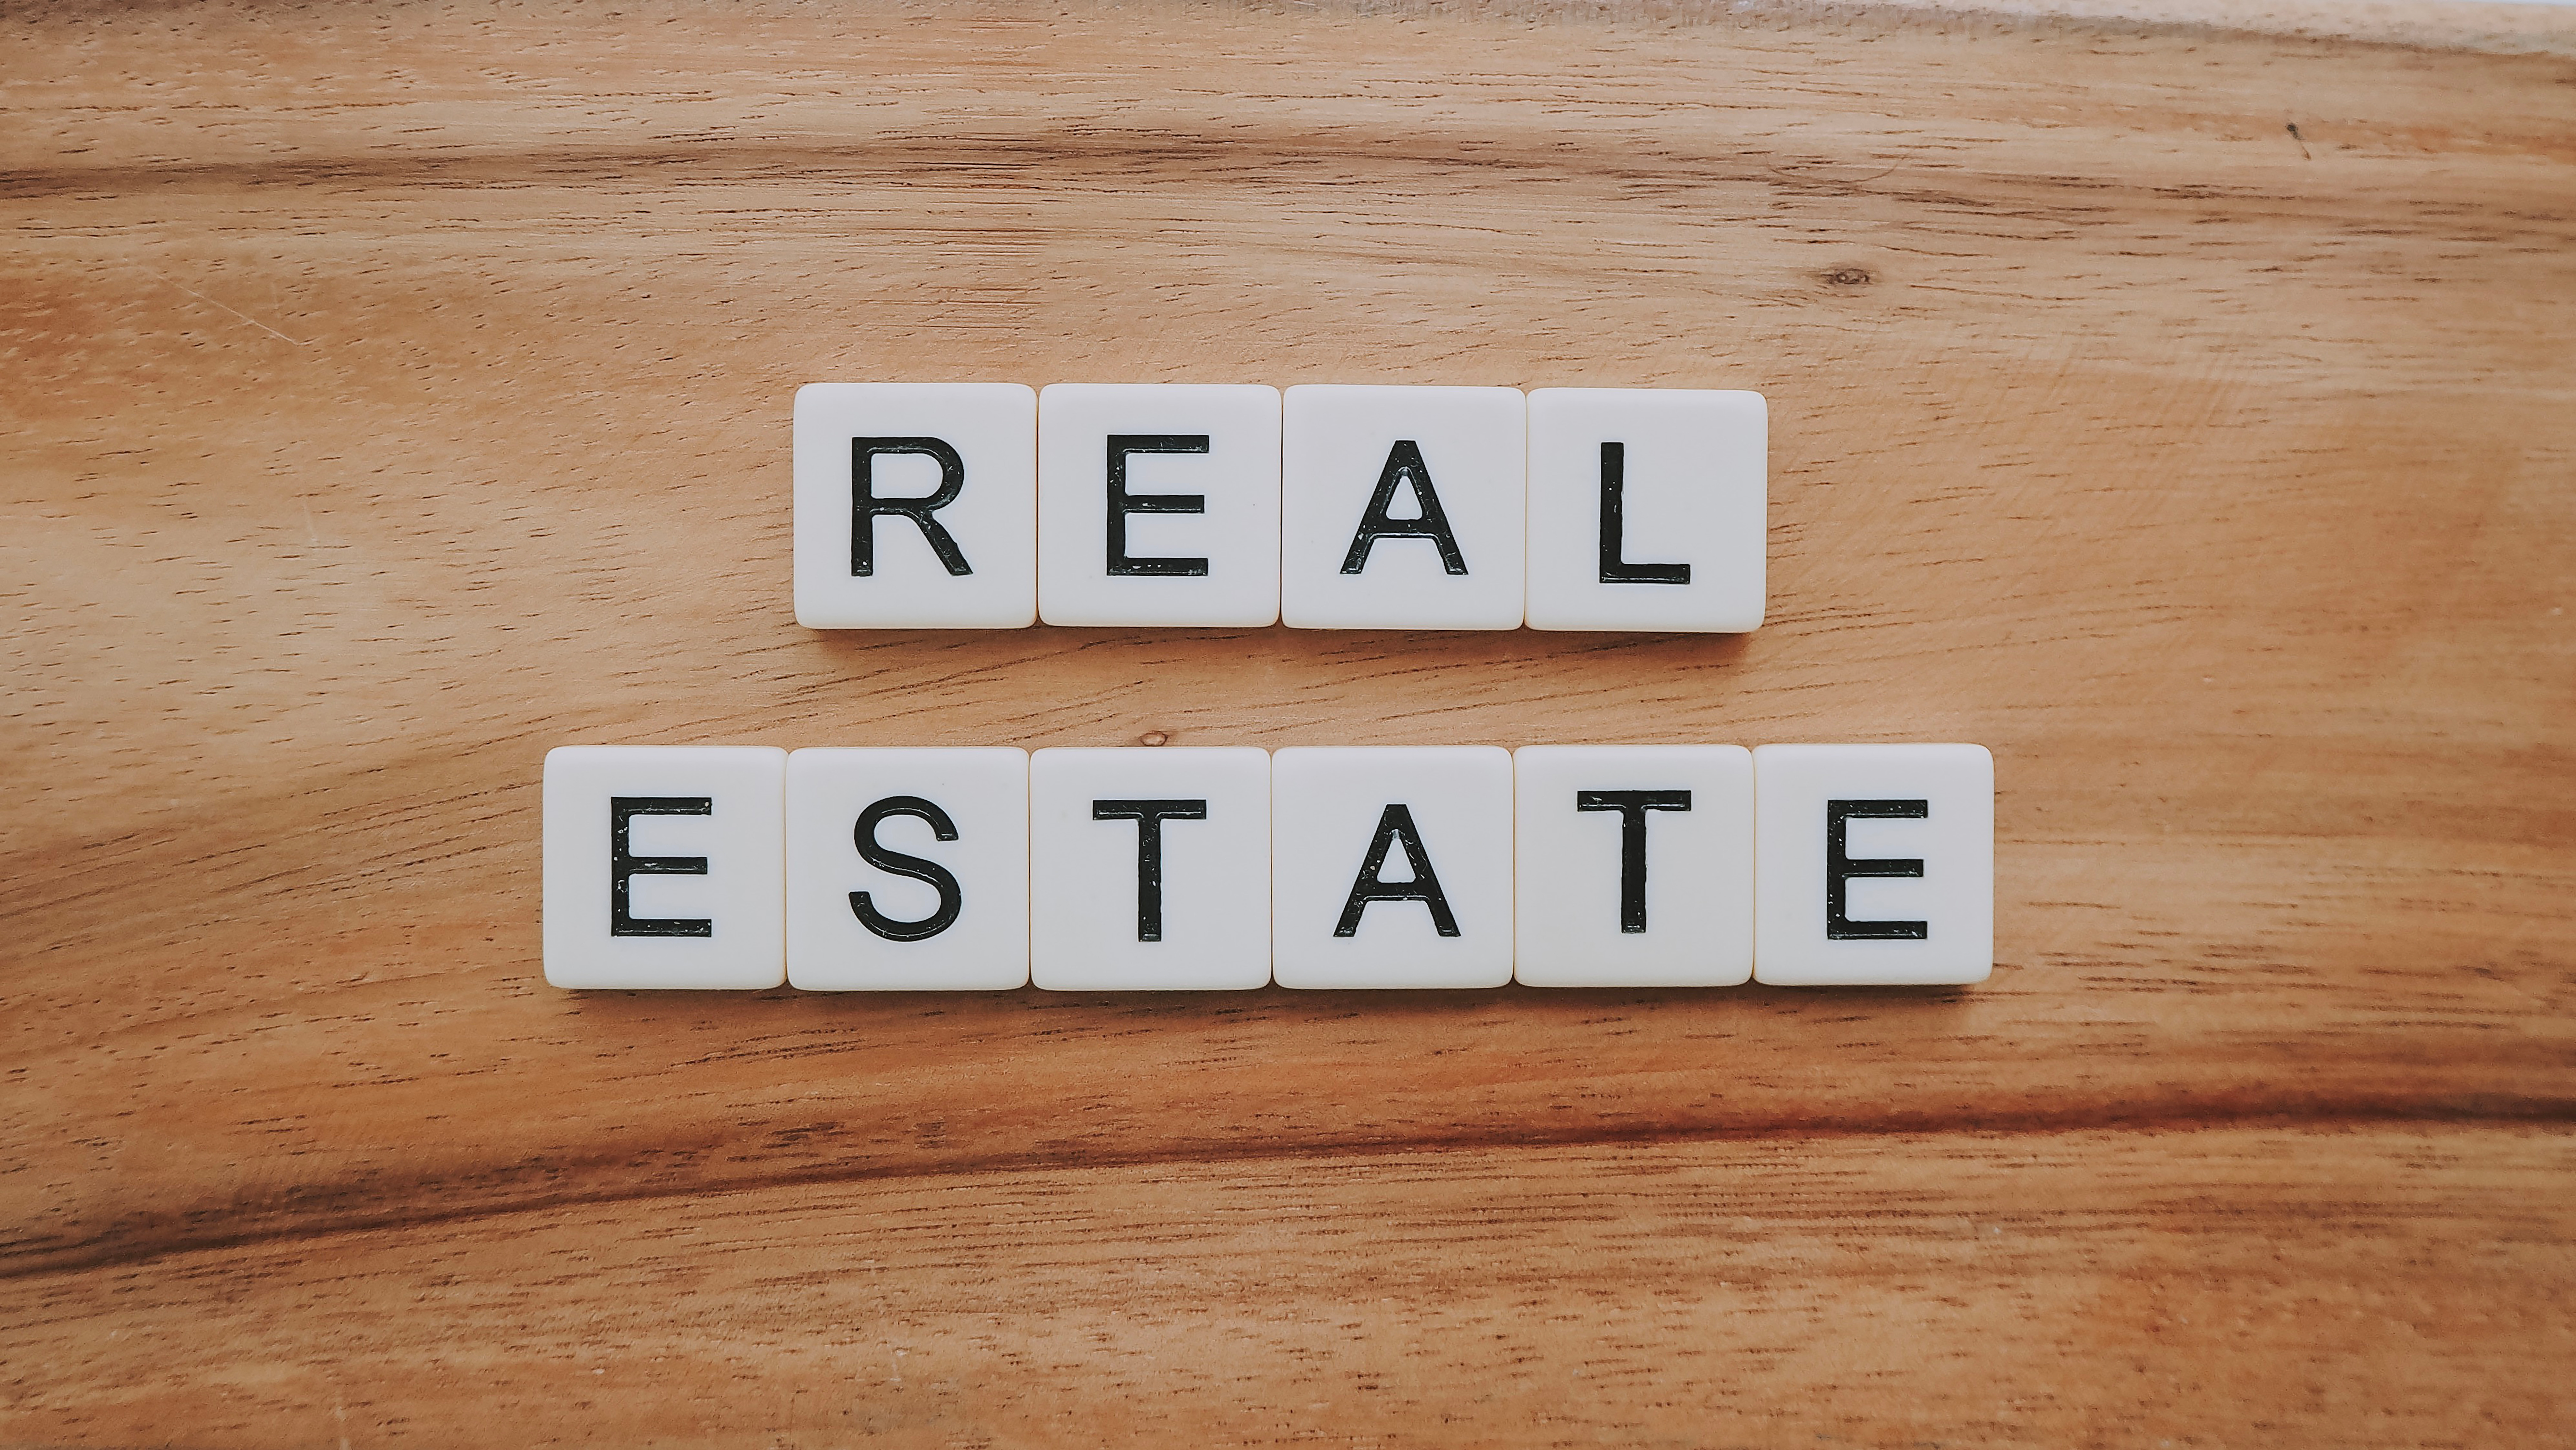 10 Essential Tips for Real Estate Investment from Professional Investors